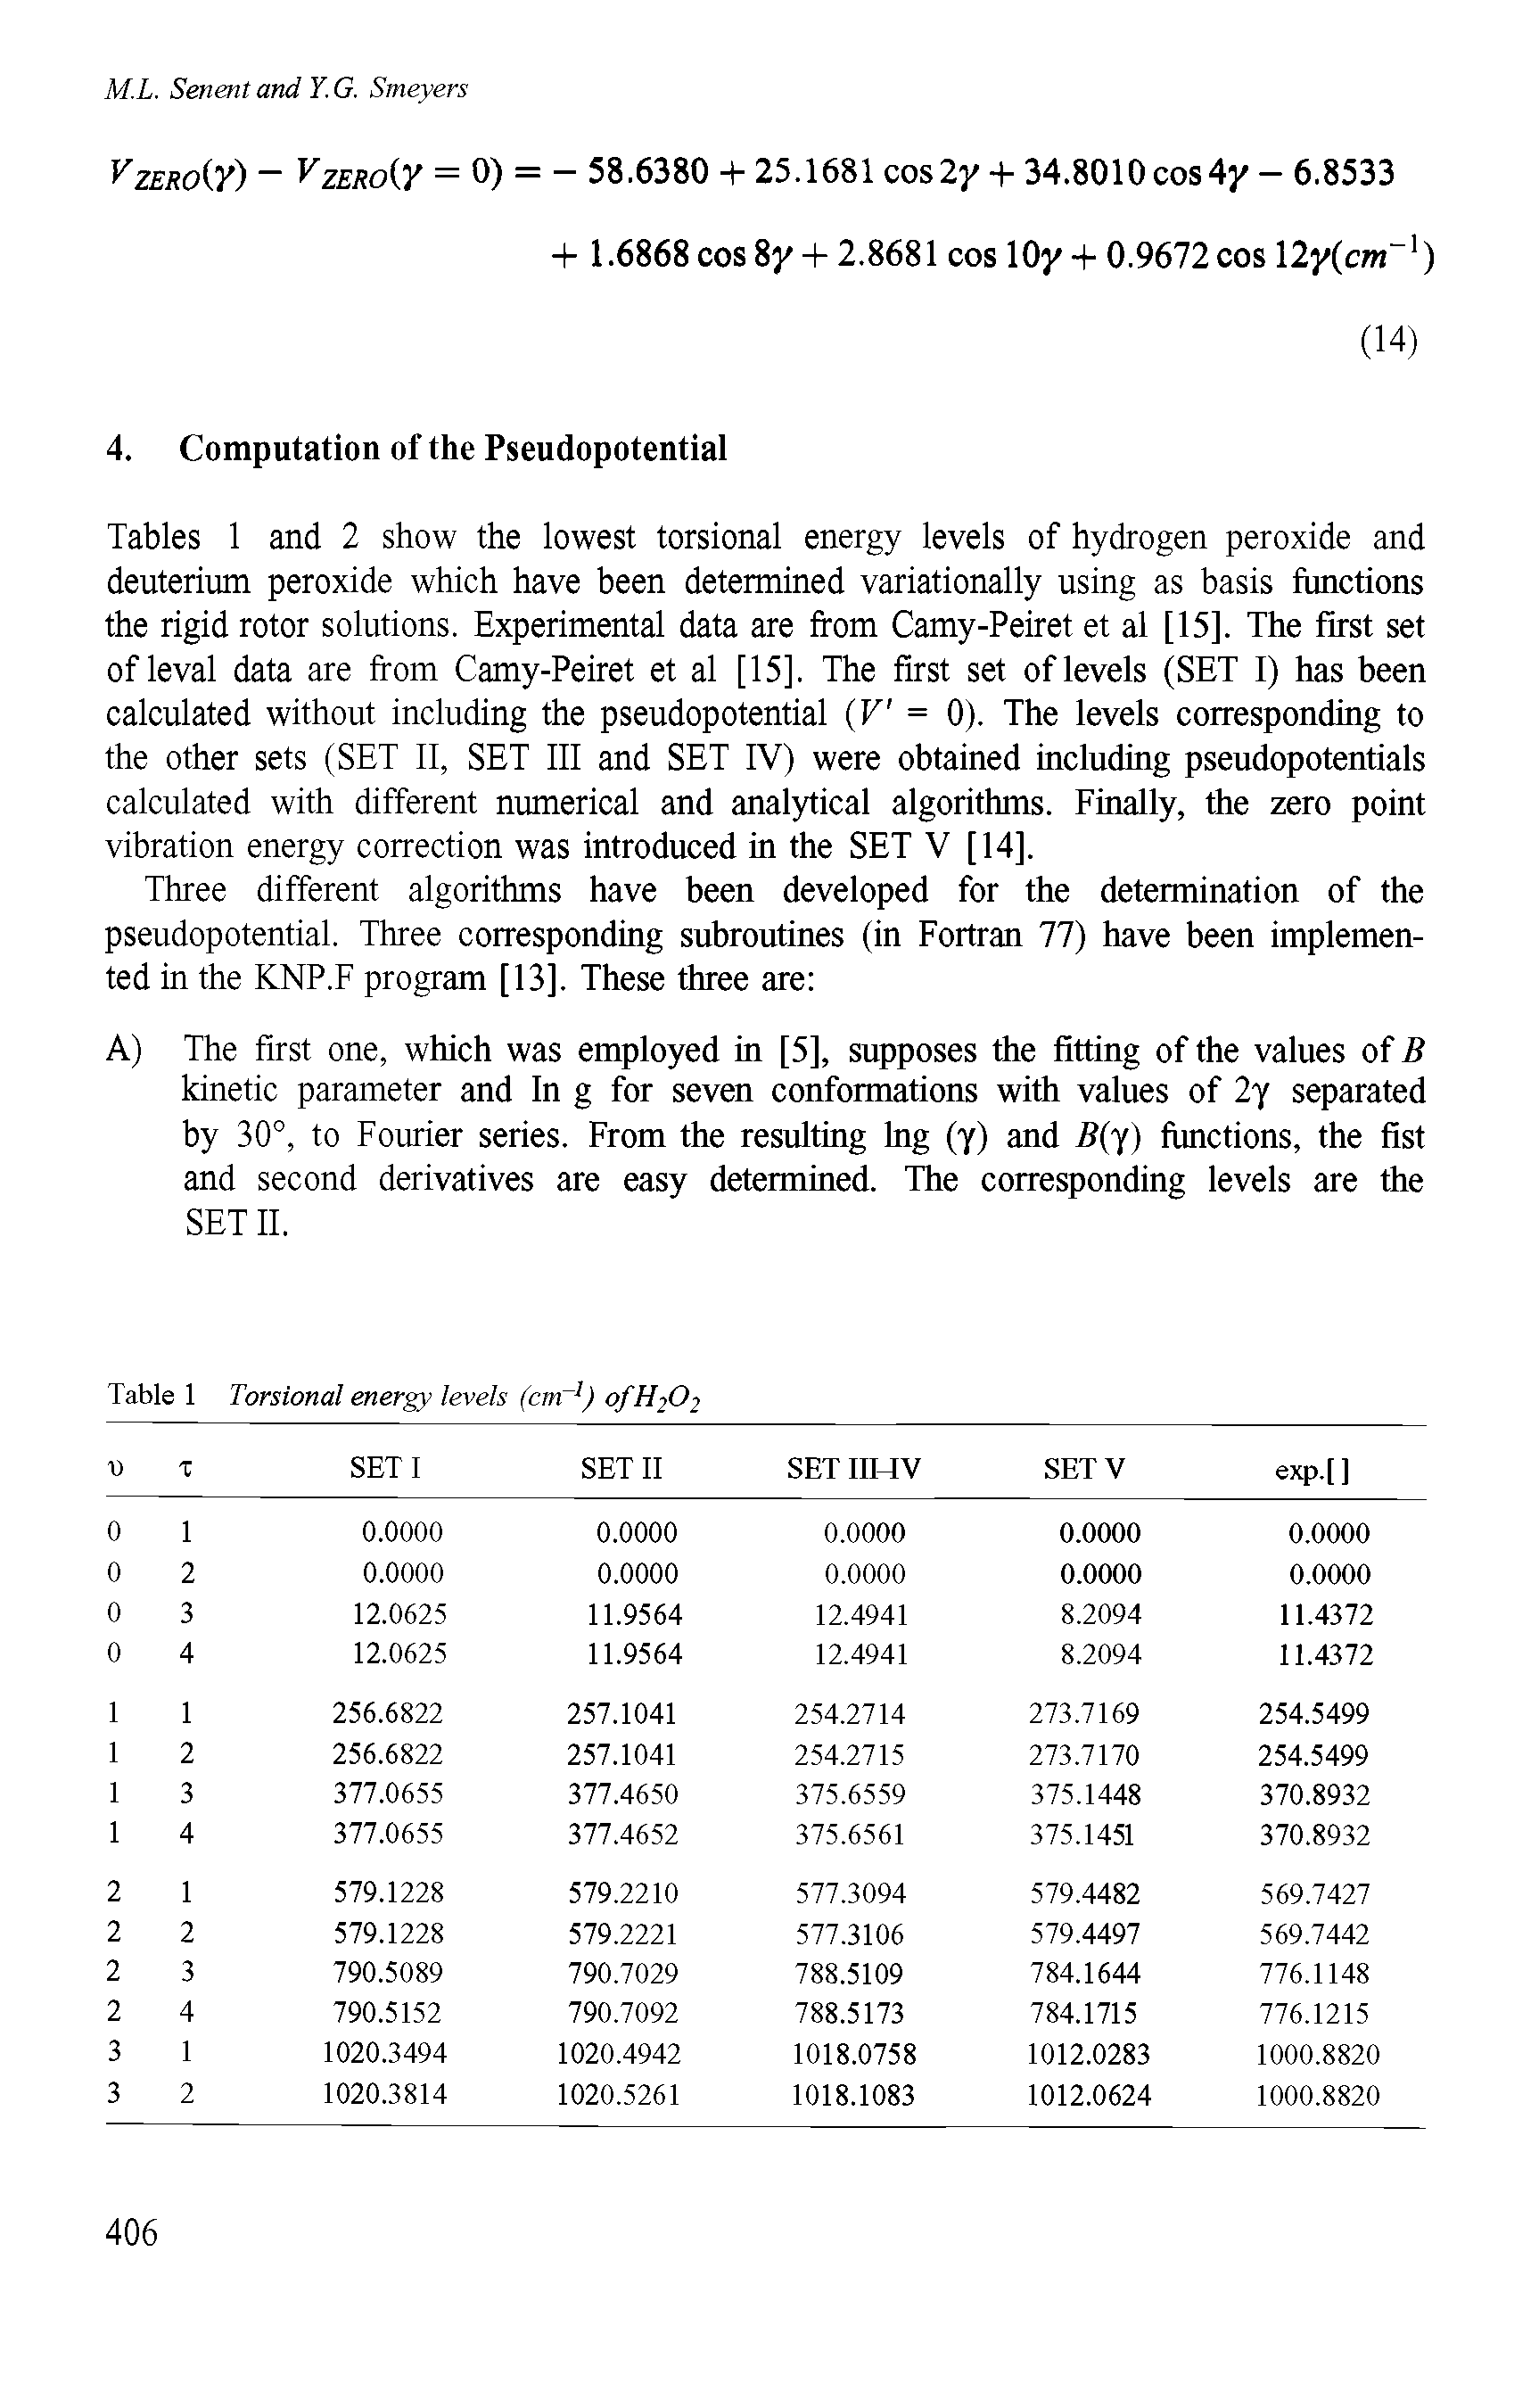 Tables 1 and 2 show the lowest torsional energy levels of hydrogen peroxide and deuterium peroxide which have been determined variationally using as basis functions the rigid rotor solutions. Experimental data are from Camy-Peiret et al [15]. The first set of leval data are from Camy-Peiret et al [15]. The first set of levels (SET I) has been calculated without including the pseudopotential V = 0). The levels corresponding to the other sets (SET II, SET III and SET IV) were obtained including pseudopotentials calculated with different numerical and analytical algorithms. Finally, the zero point vibration energy correction was introduced in the SET V [14],...